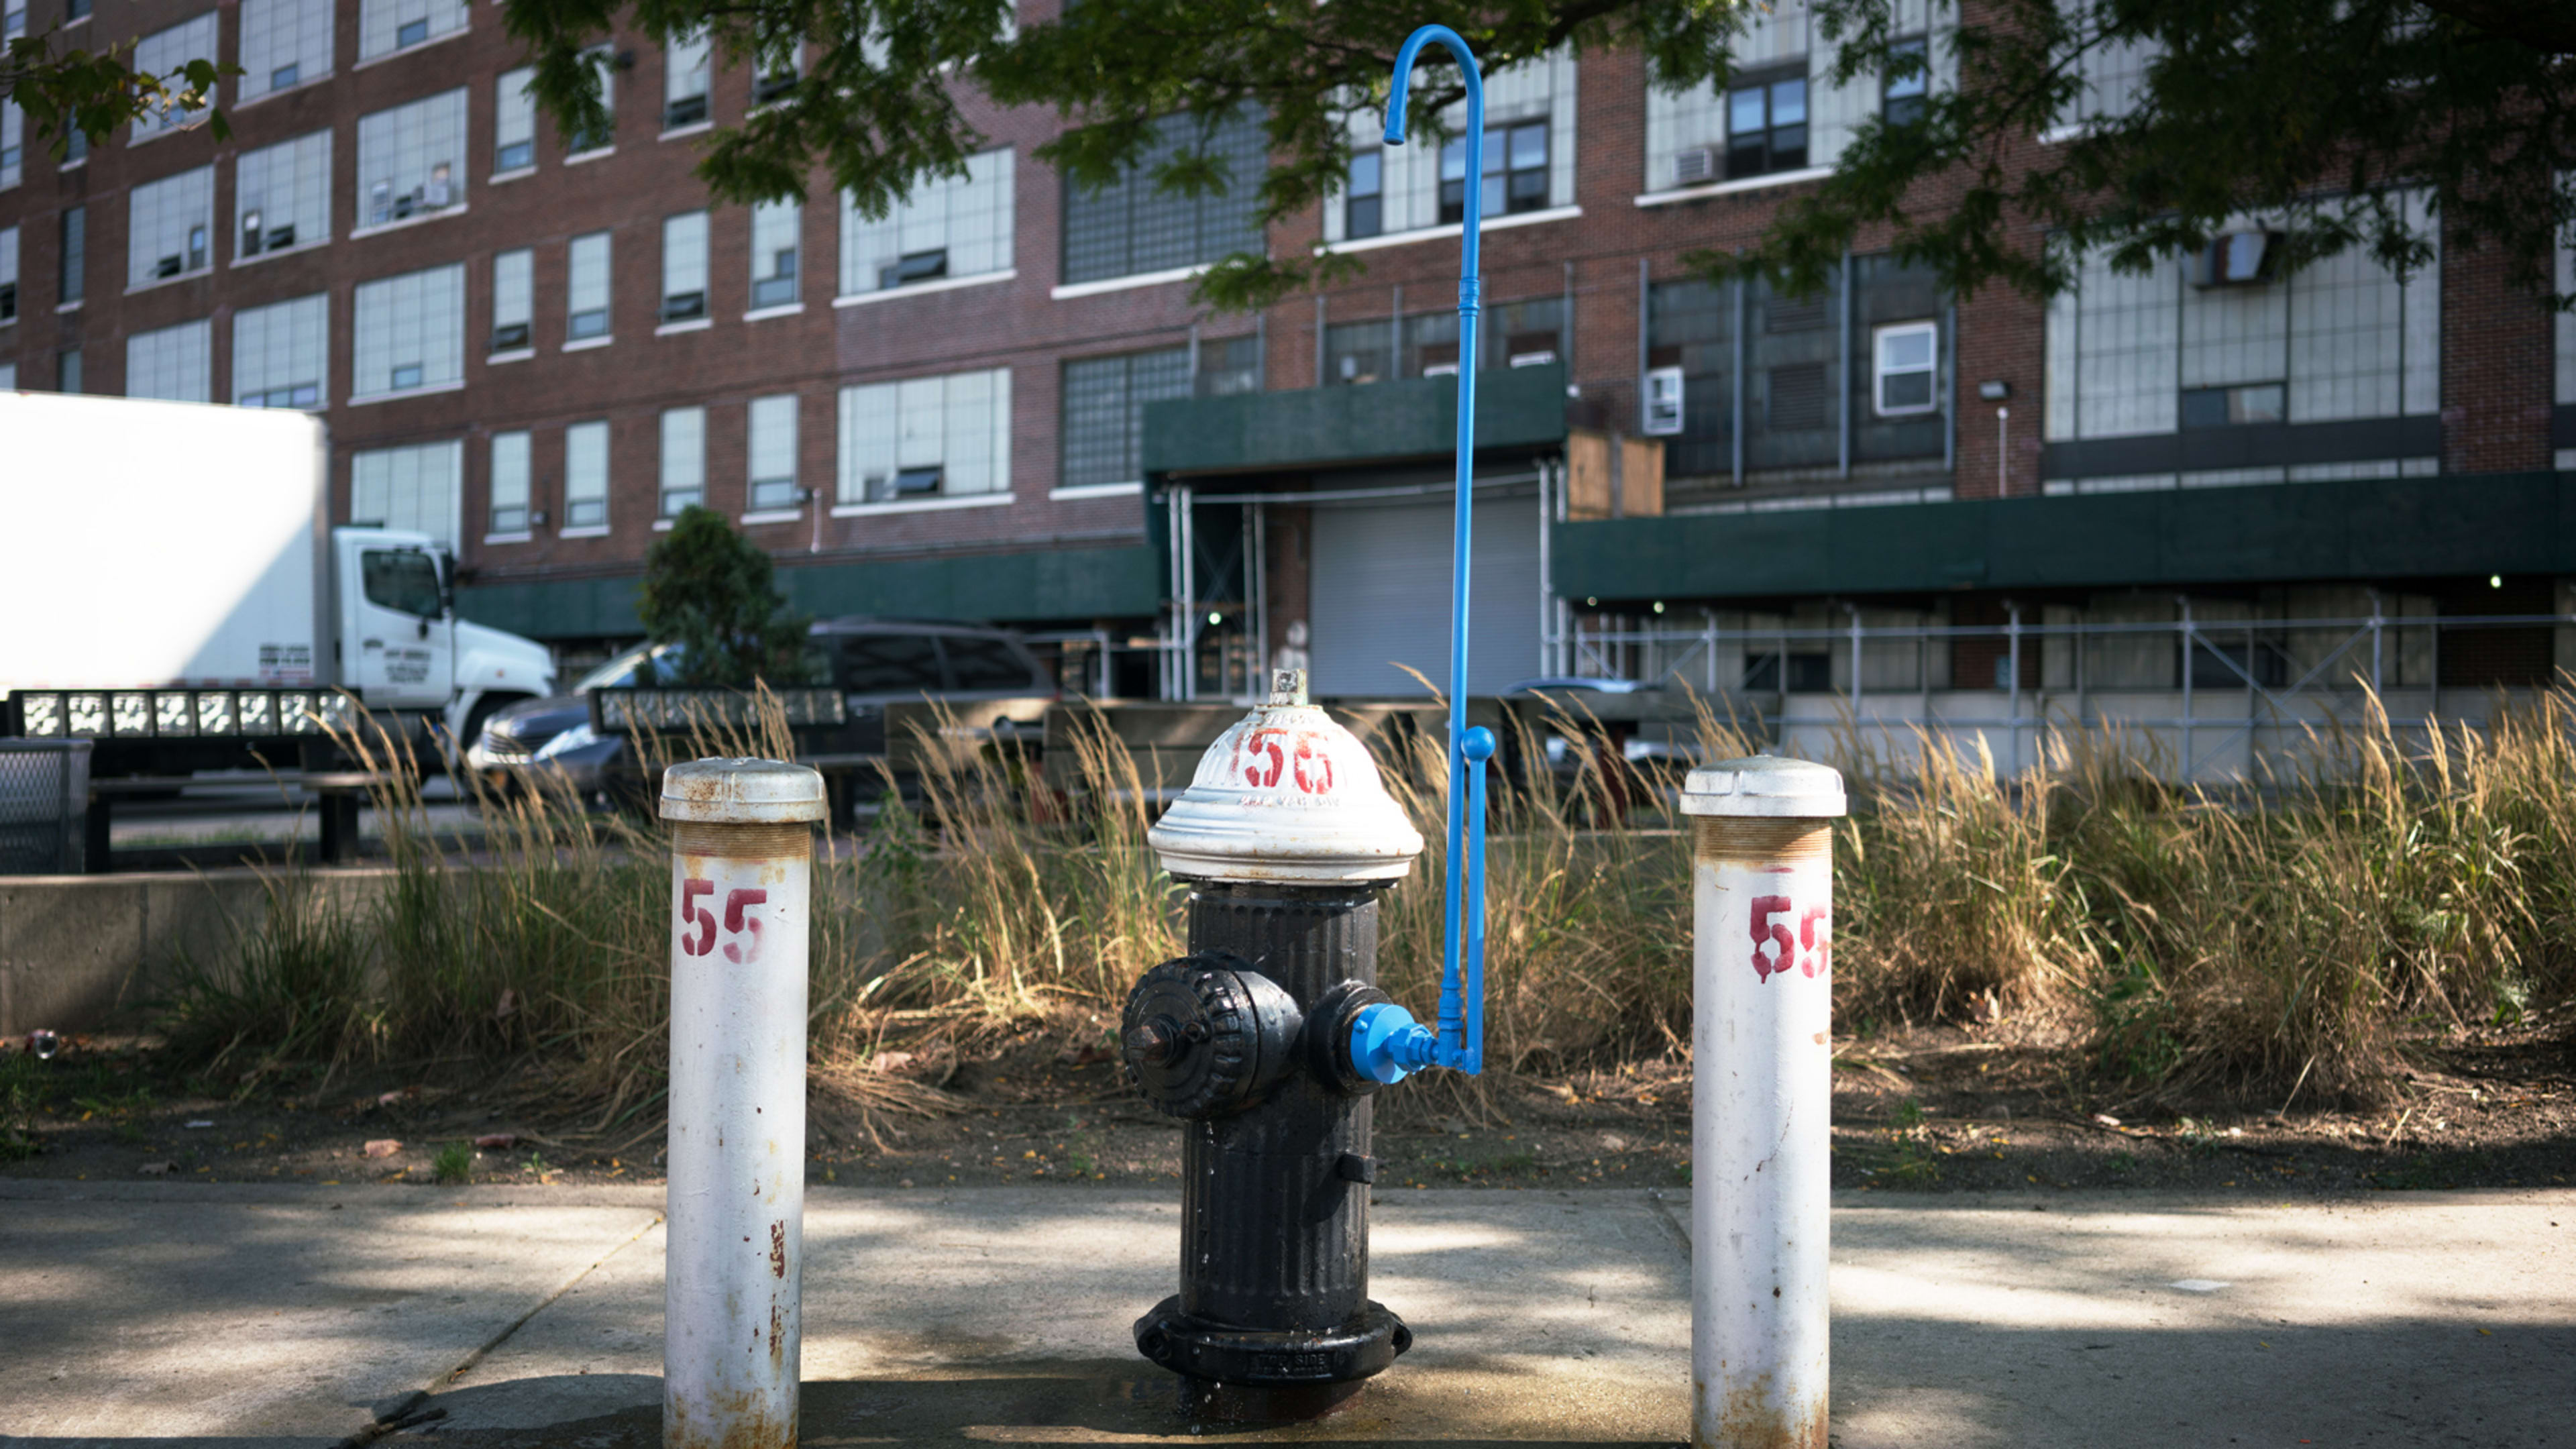 A brilliant hack for New York City’s water hydrants